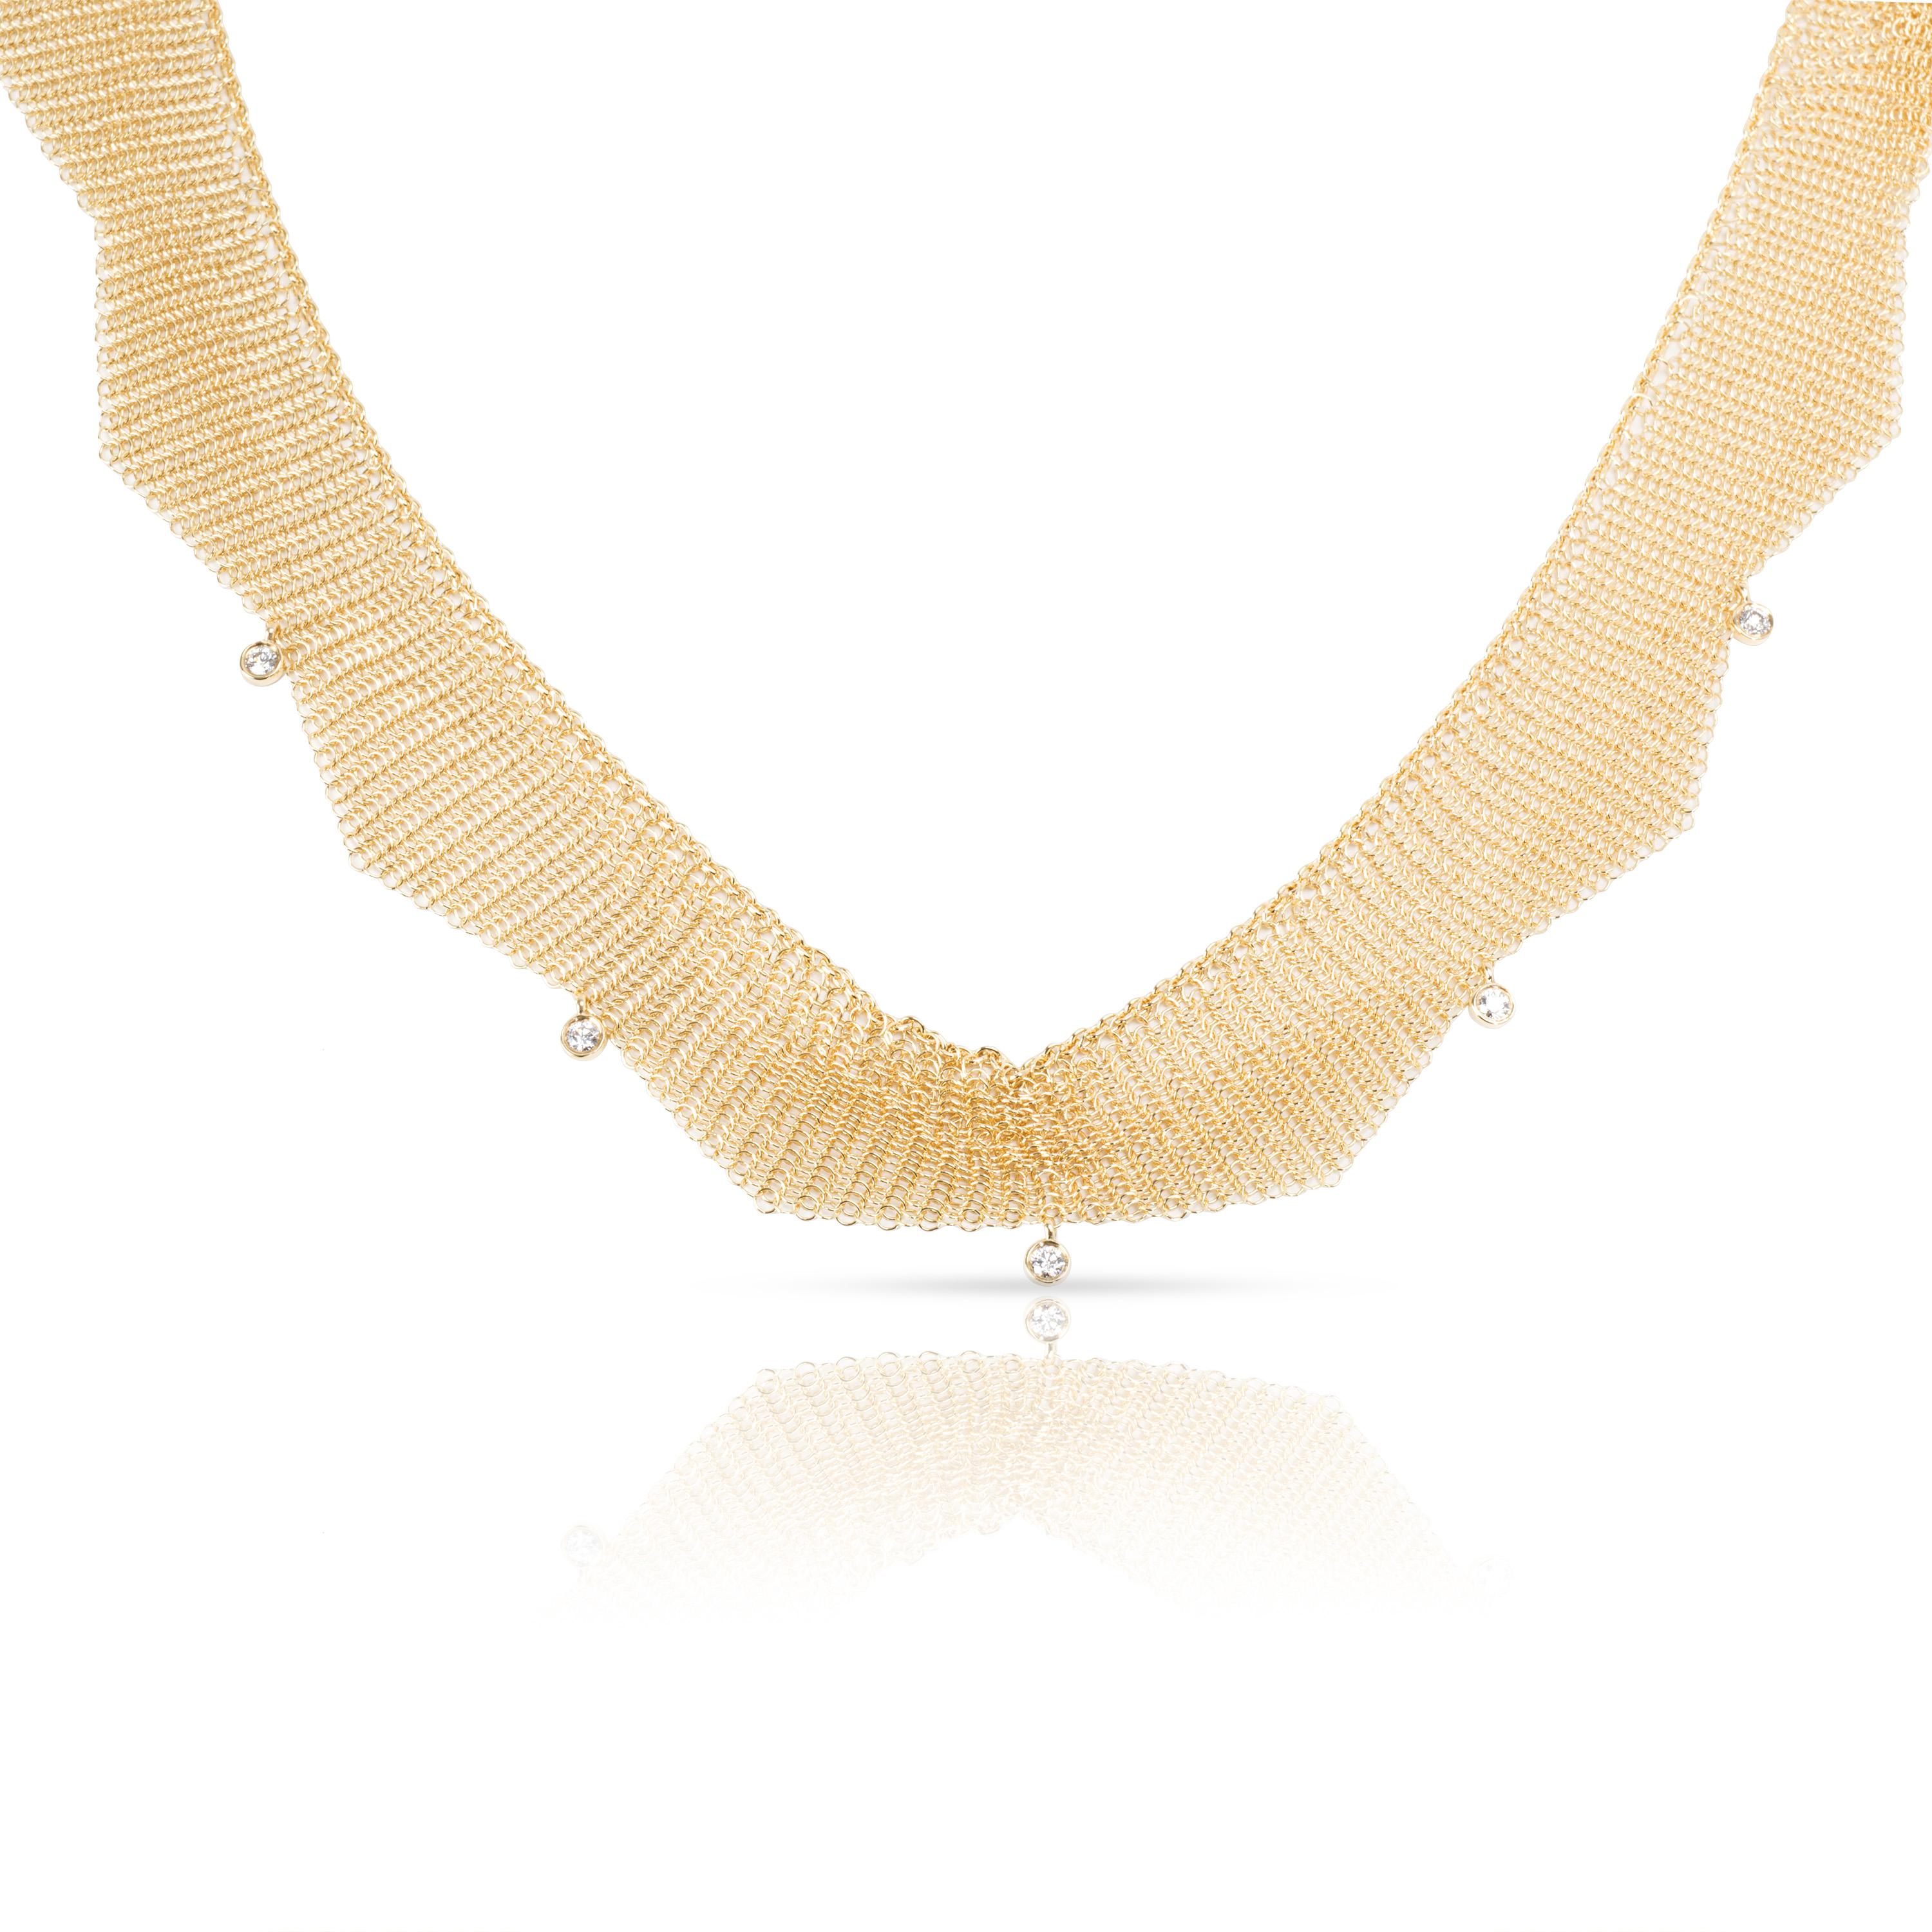 Tiffany & Co. Peretti Mesh Choker Diamond Necklace in 18K Yellow Gold 0.25 Carat In Excellent Condition In New York, NY